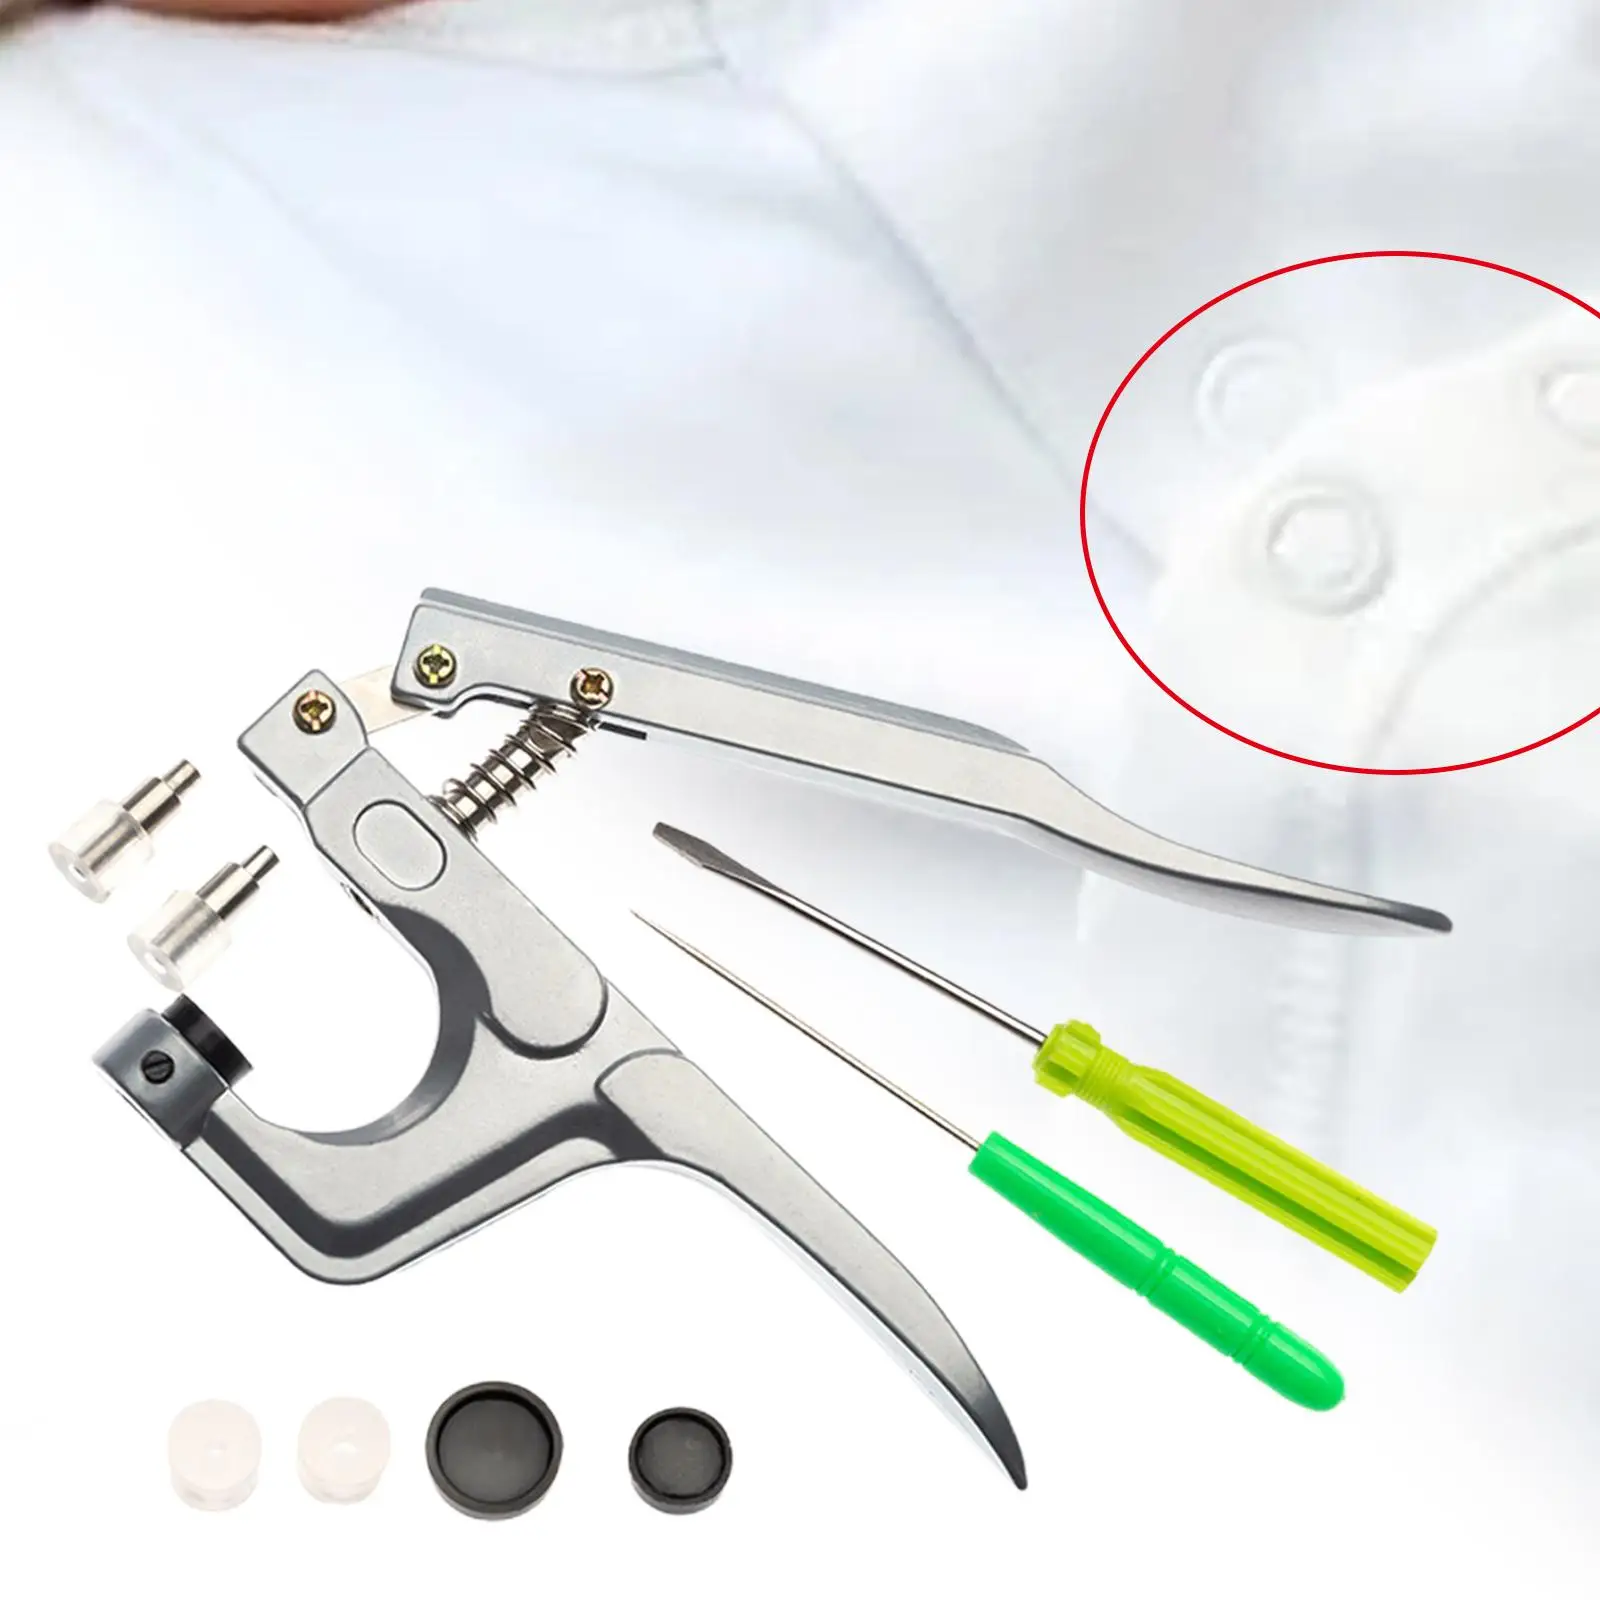 Hand Pressure Pliers Set Diaper Fastening for Prong Snap Buttons Beginner